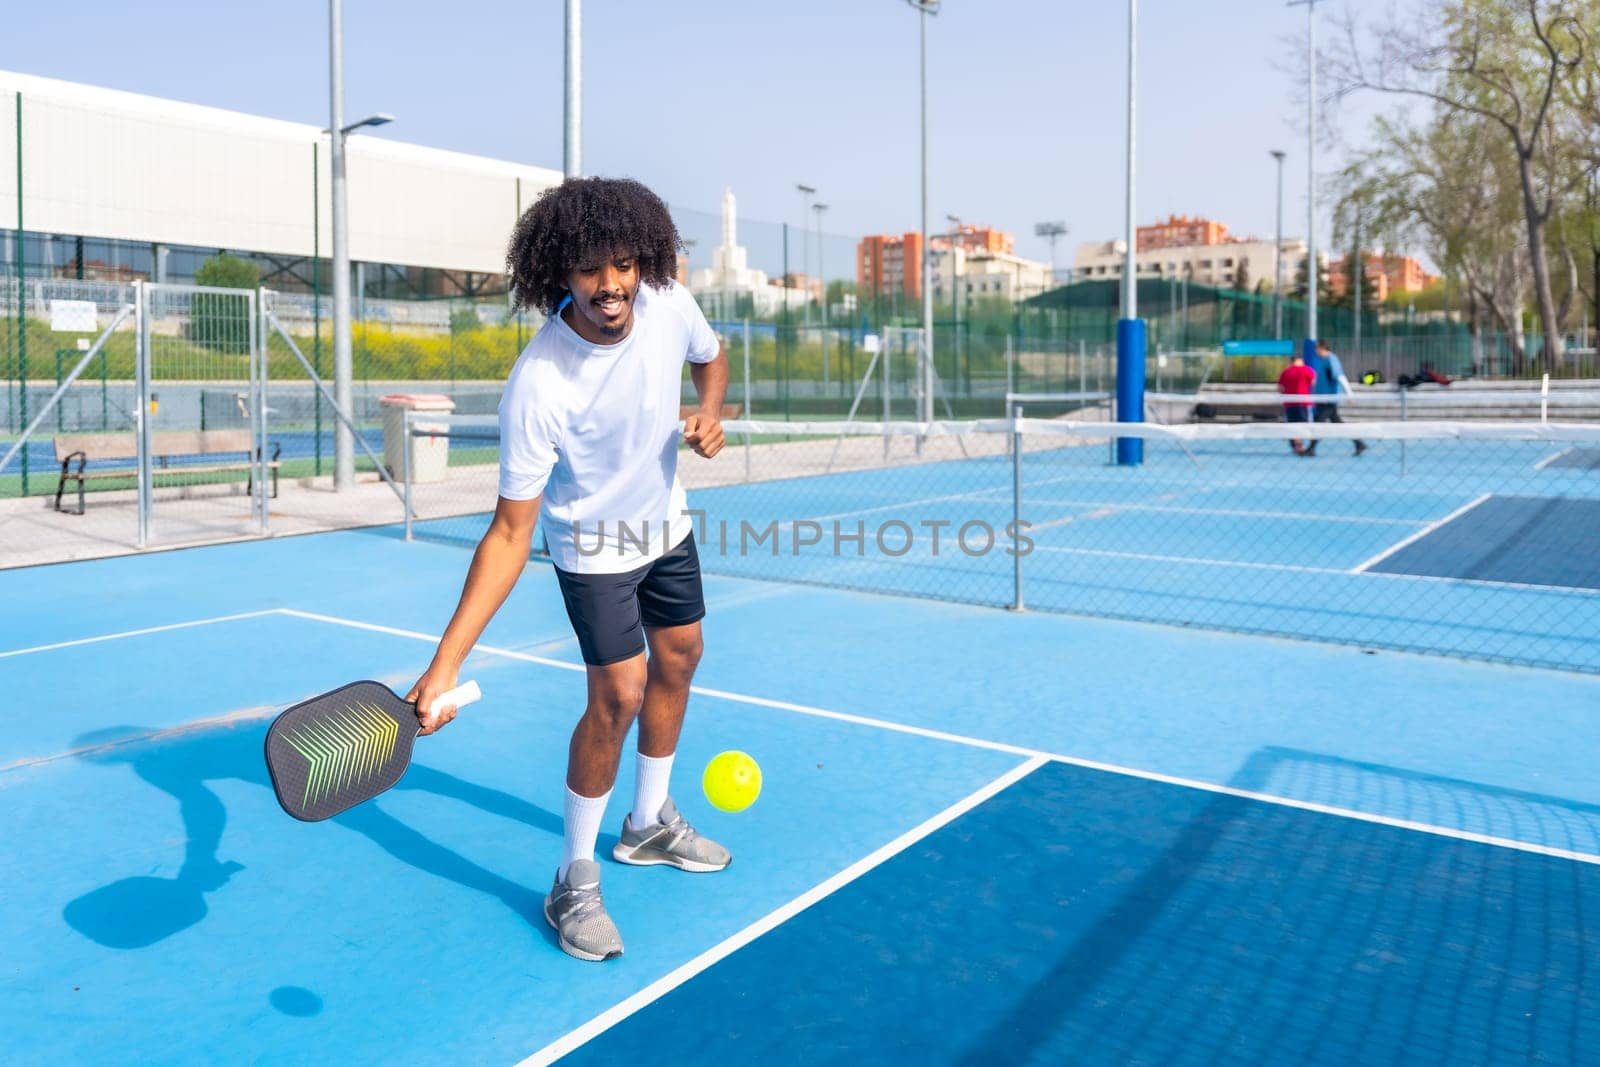 Smiling man with afro hair serving while playing pickleball by Huizi